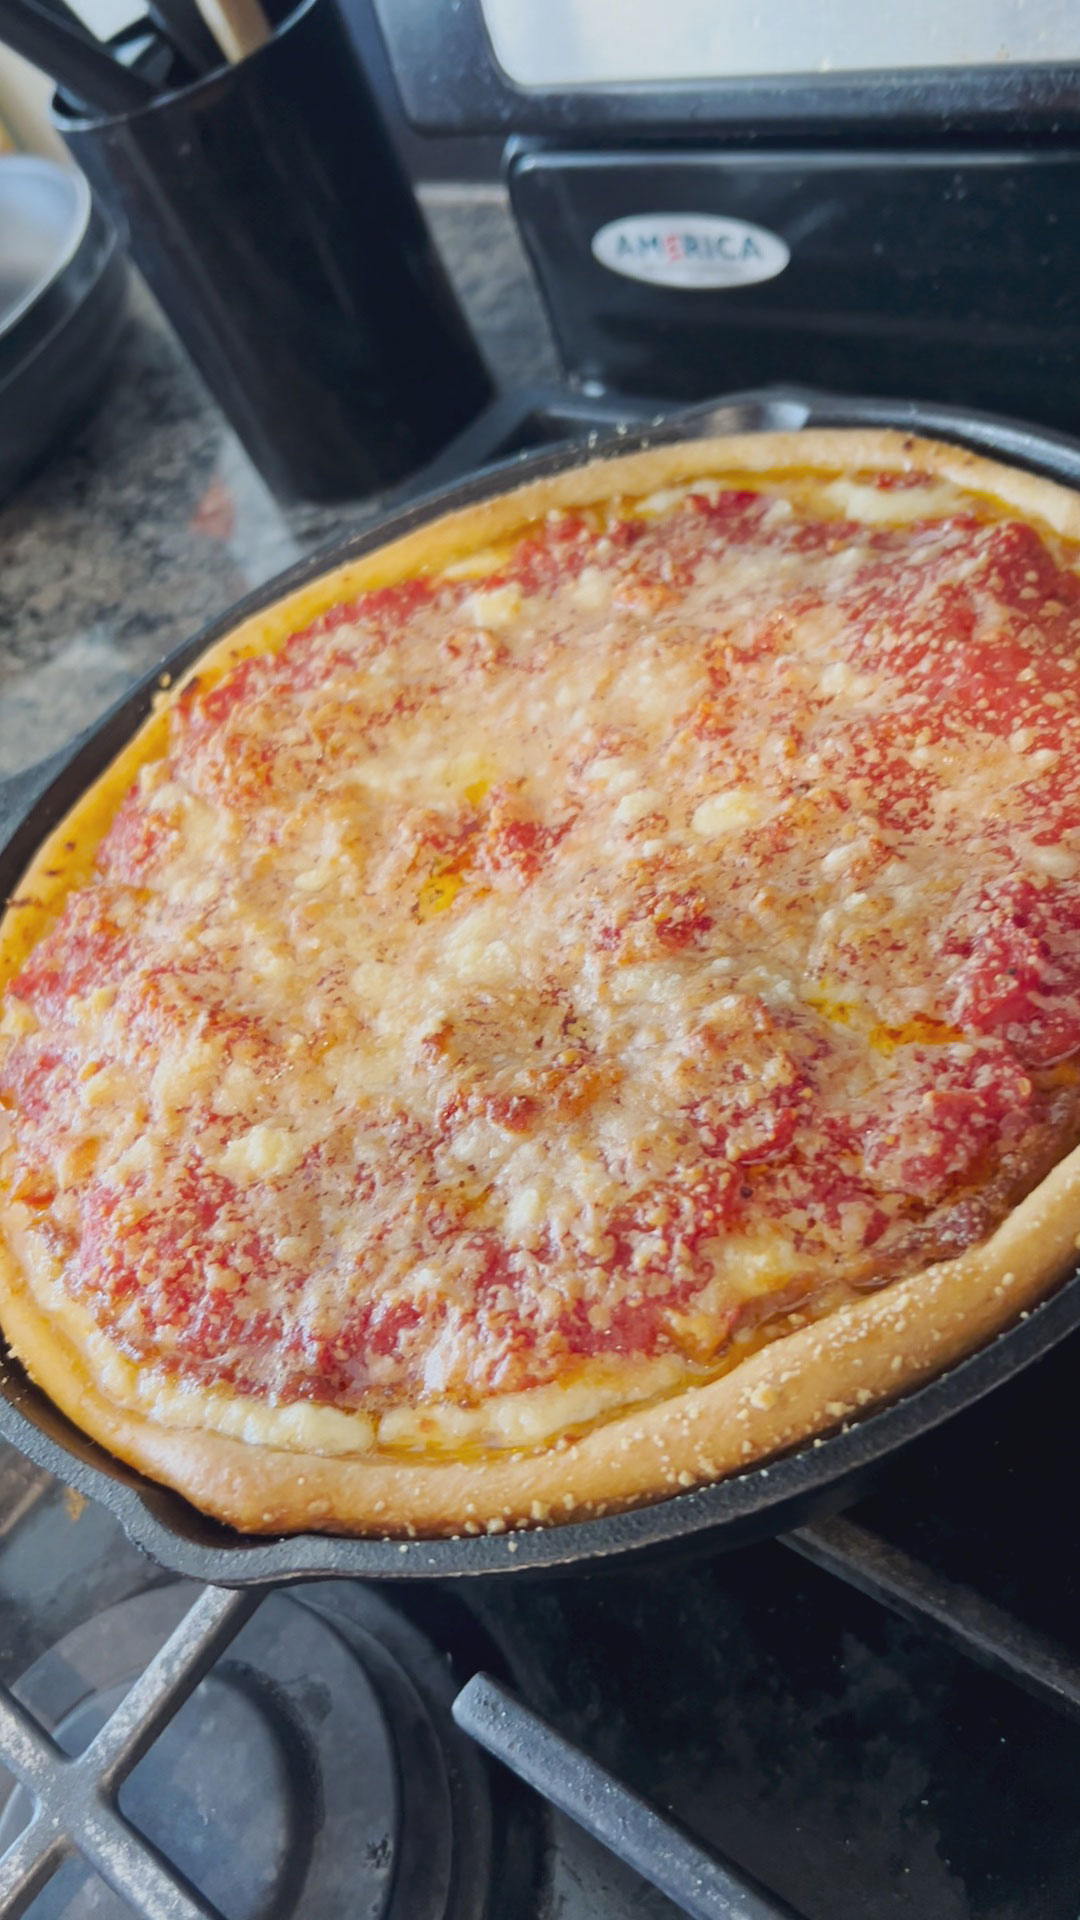 How To Make The Best Chicago Deep Dish Pizza - Ramshackle Pantry